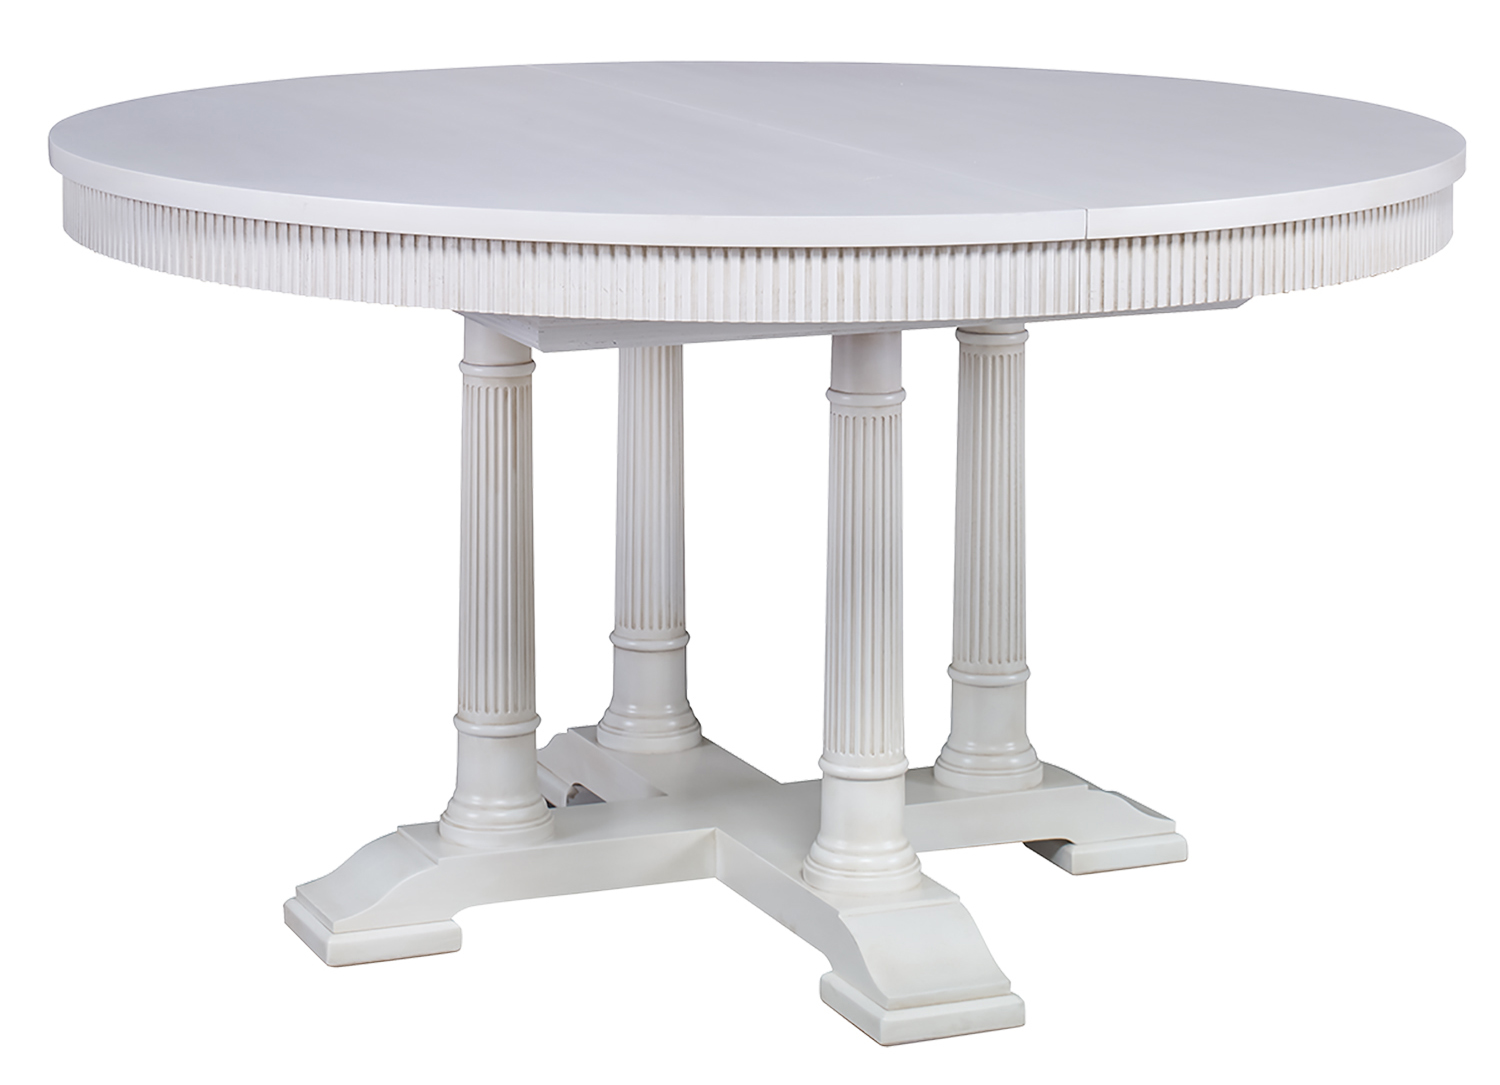 white Hollyhock Round Dining Table by Mark D. Sikes for Chaddock